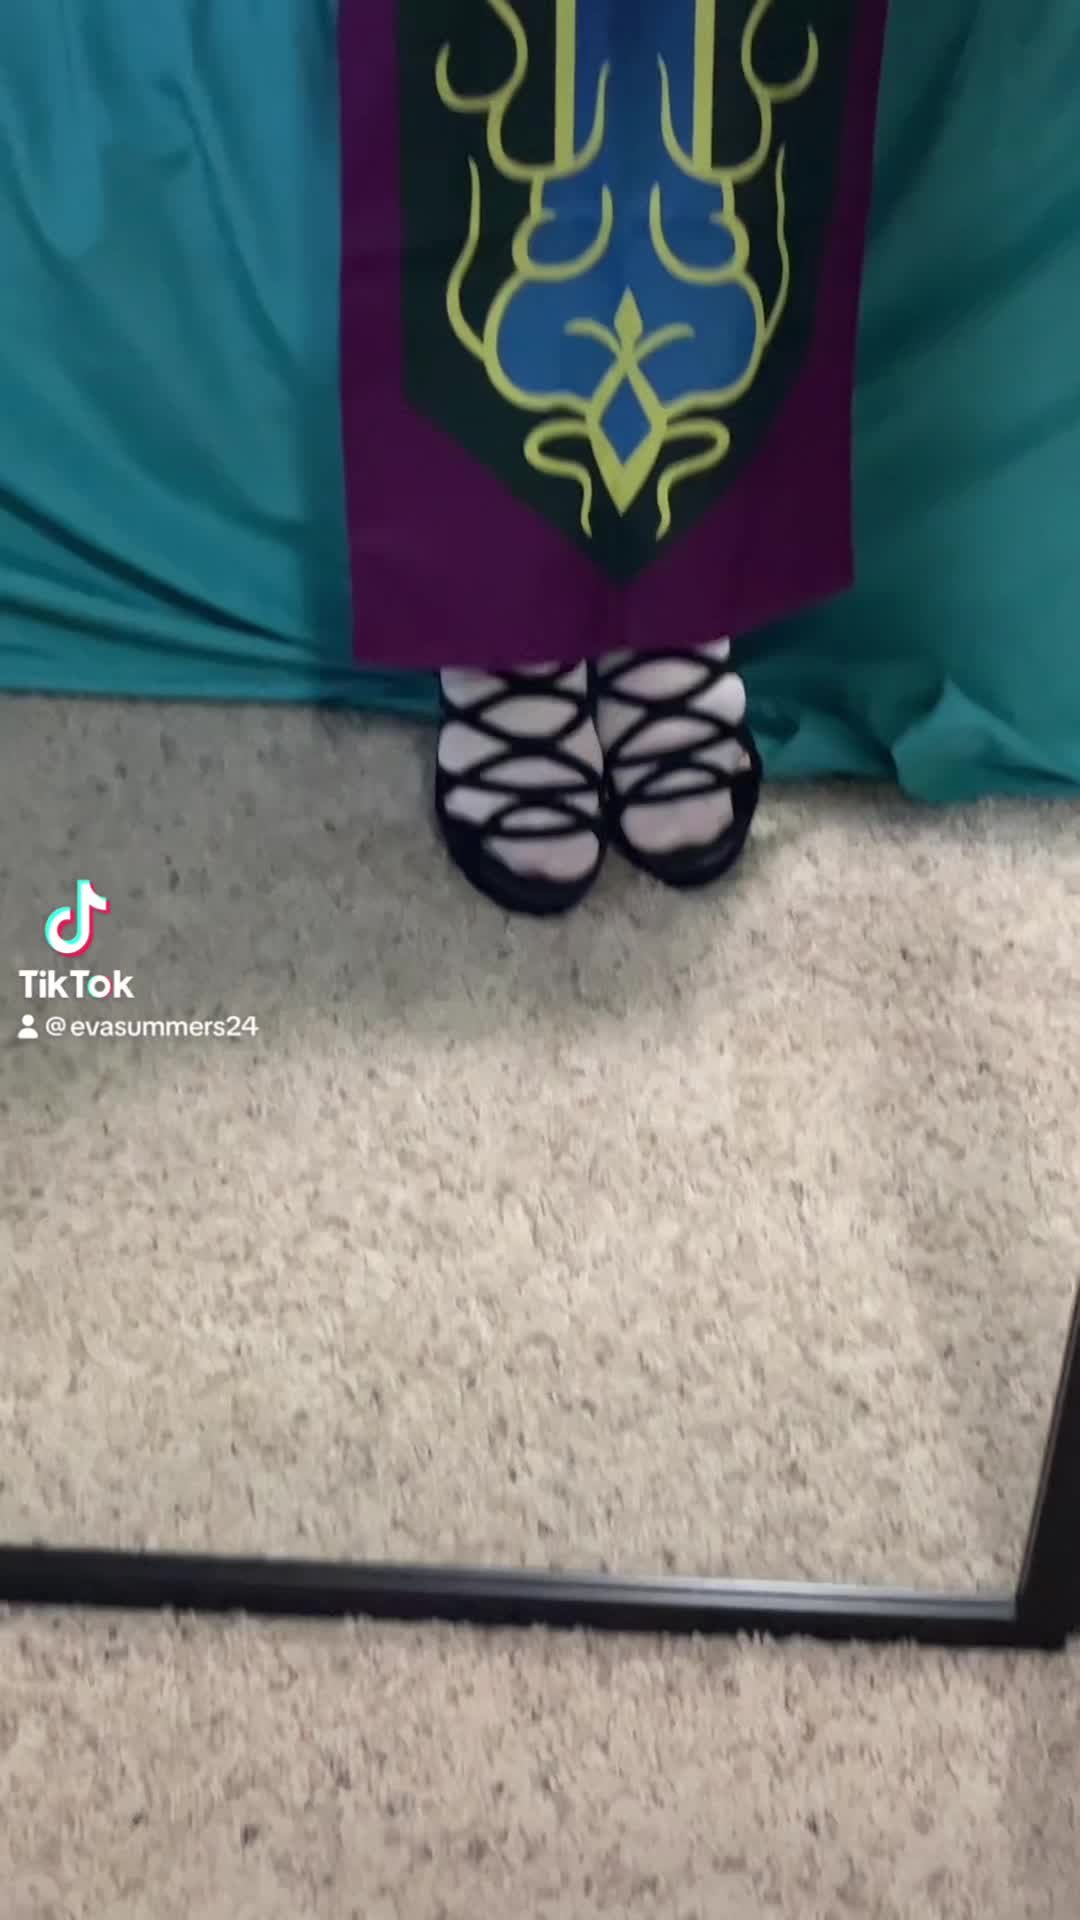 Video by Evasummers with the username @Evasummers, who is a star user,  March 8, 2024 at 1:00 AM. The post is about the topic NSFW TikTok and the text says '#girls #fyp #usa #blonde #thighhighs #petite #cosplay #princesszelda #zelda #highheels #cosplaygirls #princesszeldacosplay #zeldacosplay #cosplayers #meme #adultcontent #adulthumor #contentcreator #foryou #onlyfans #onlyfansgirls #foryou #midriff #belly..'